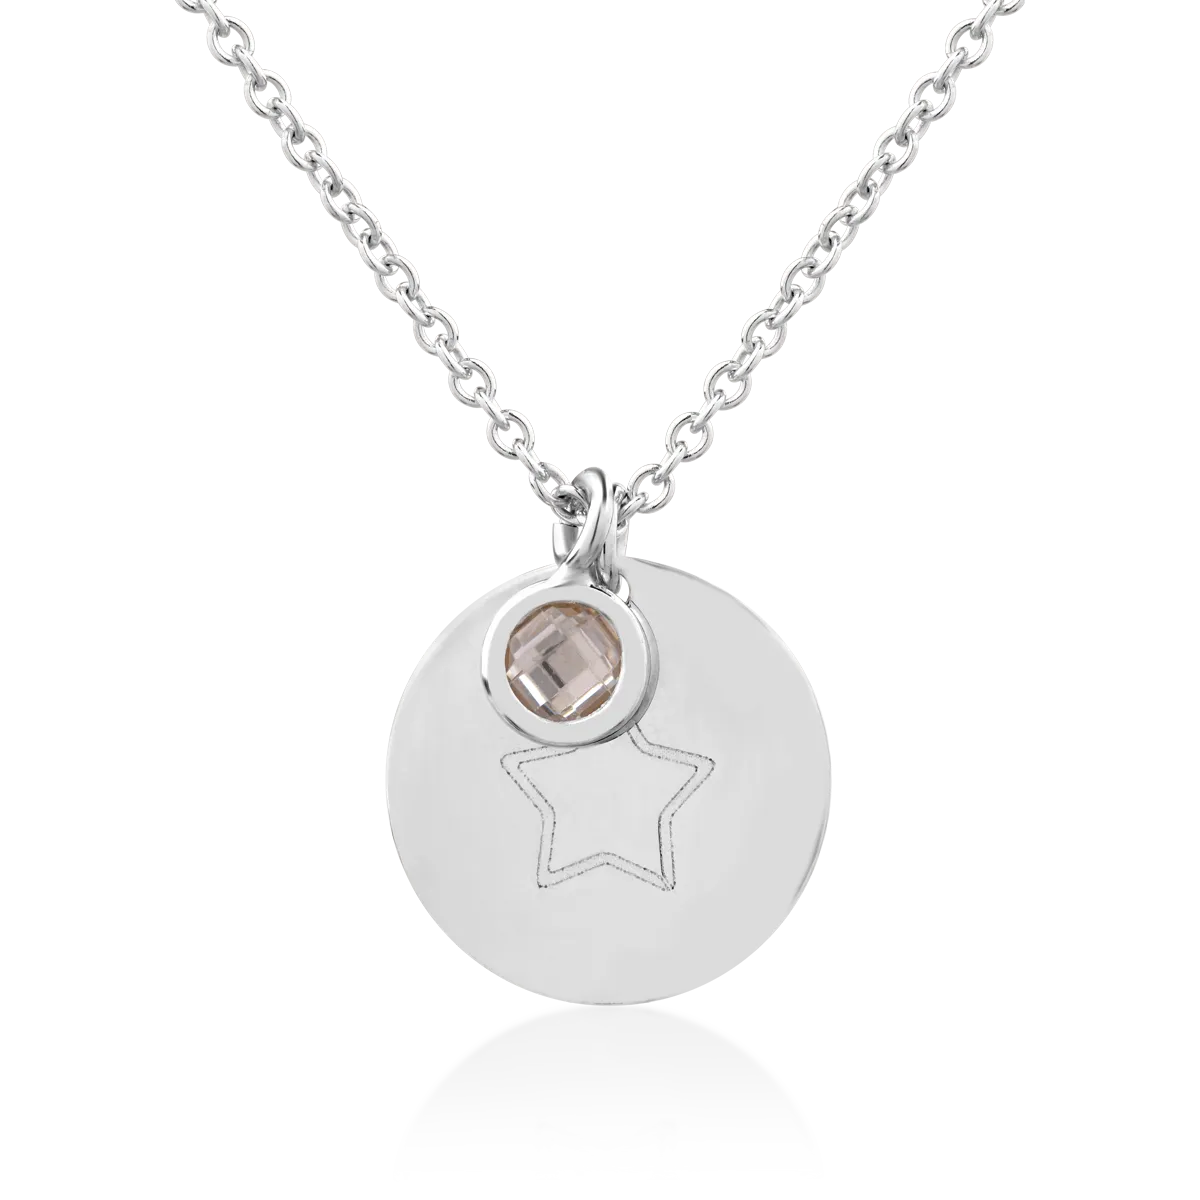 14K white gold penny pendant and charm necklace